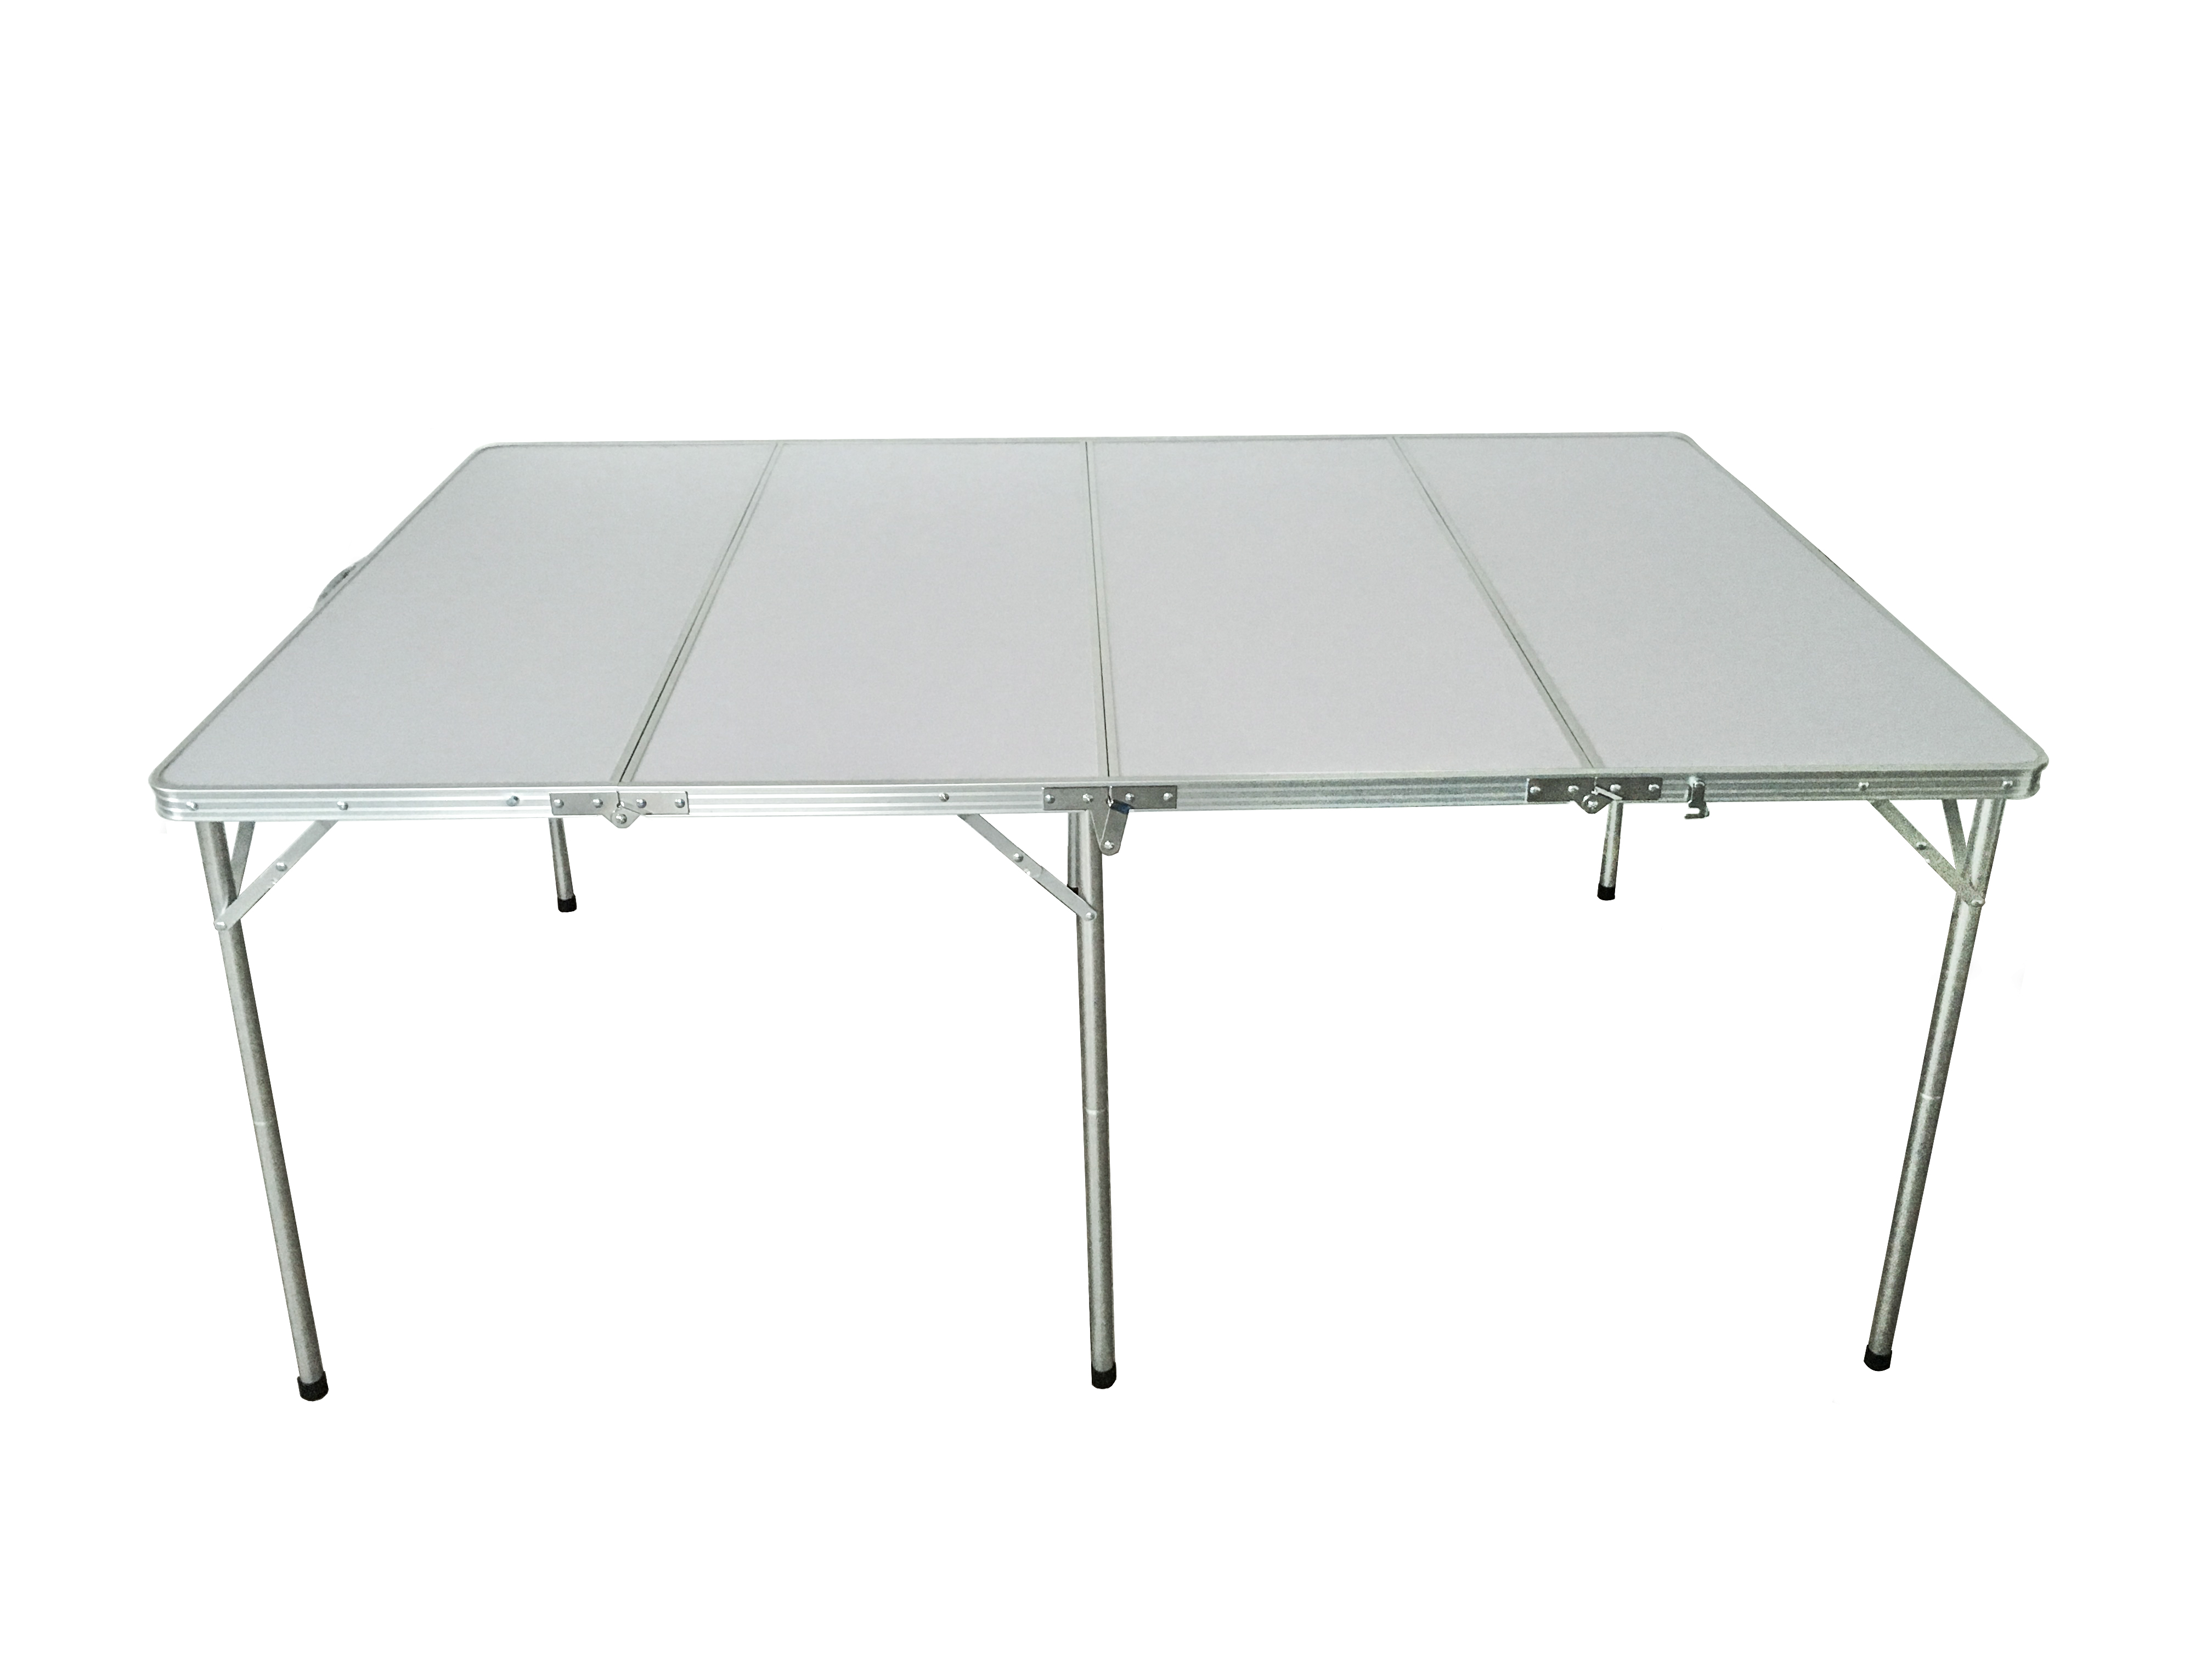 4′ x 6′ feet folding and portable GAMING TABLE BACK IN STOCK NOW ! Shipping WORLDWIDE !!!